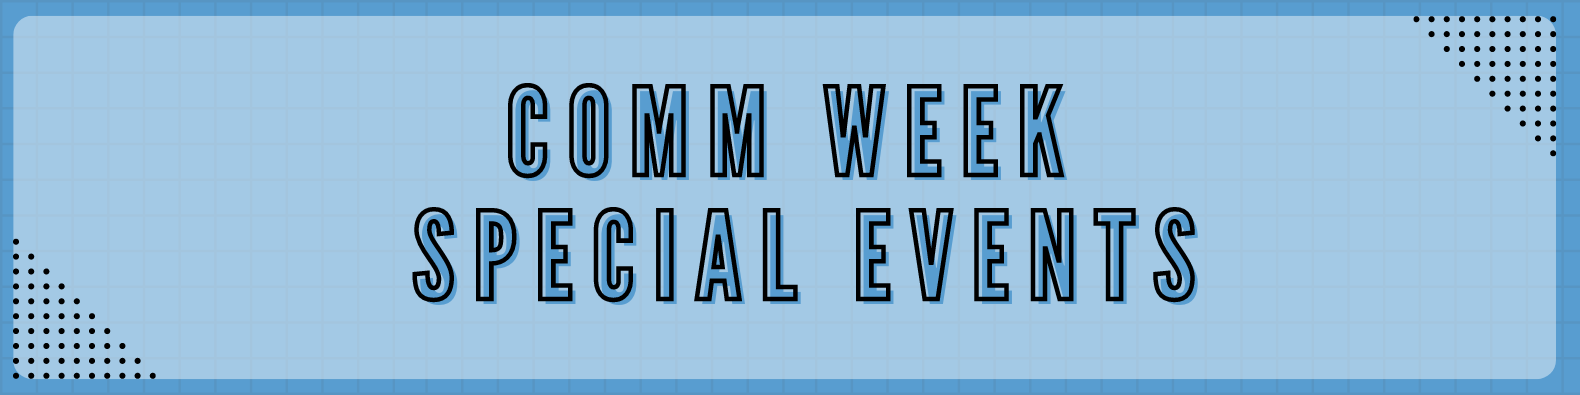 Comm Week Special Events